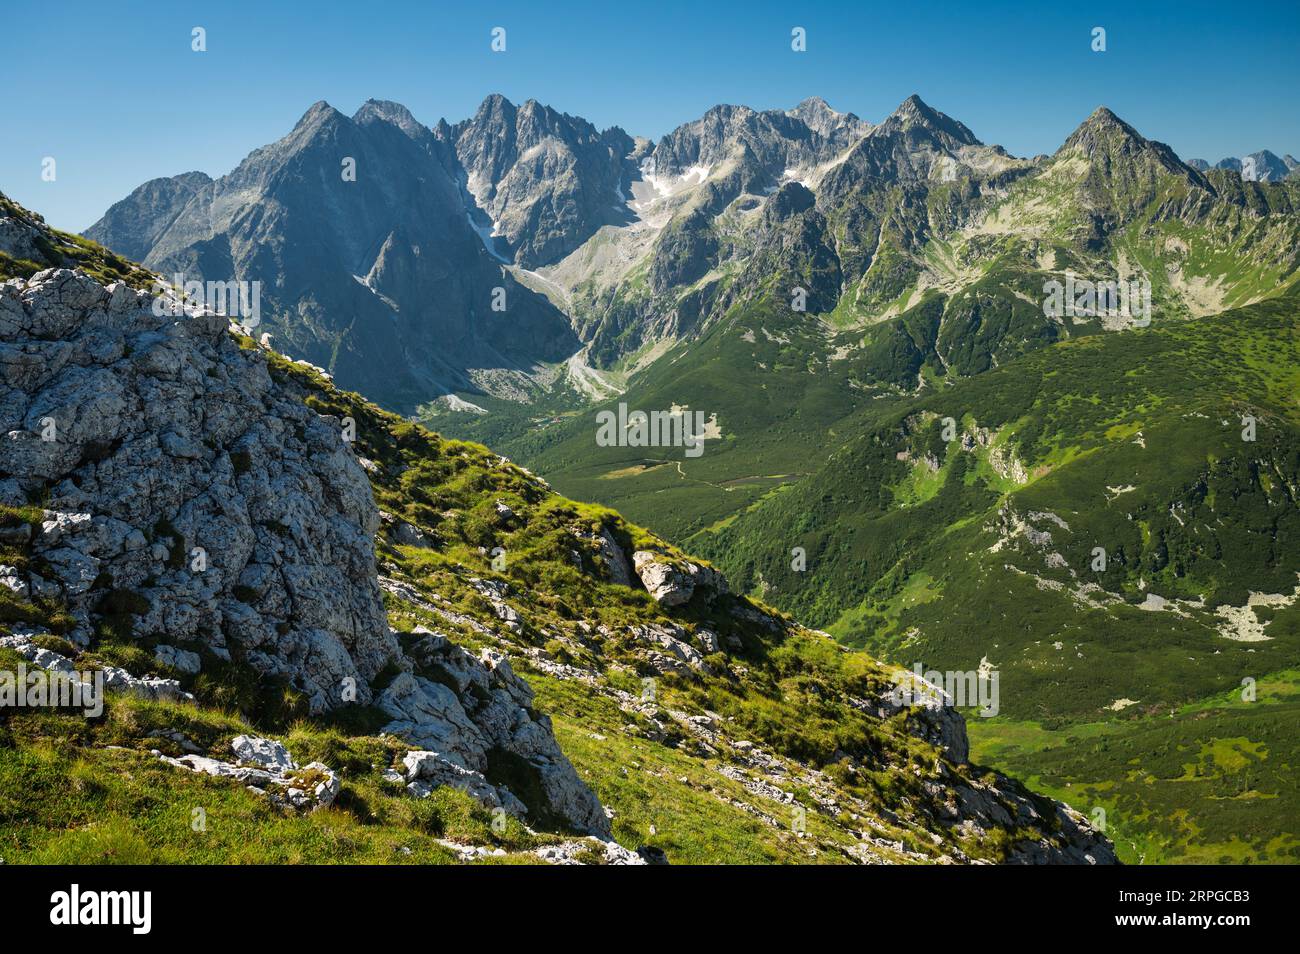 Mountain landscape, where the High Tatras meet the Belianske Tatras, bathed in sunlight and surrounded by emerald-green meadows Stock Photo